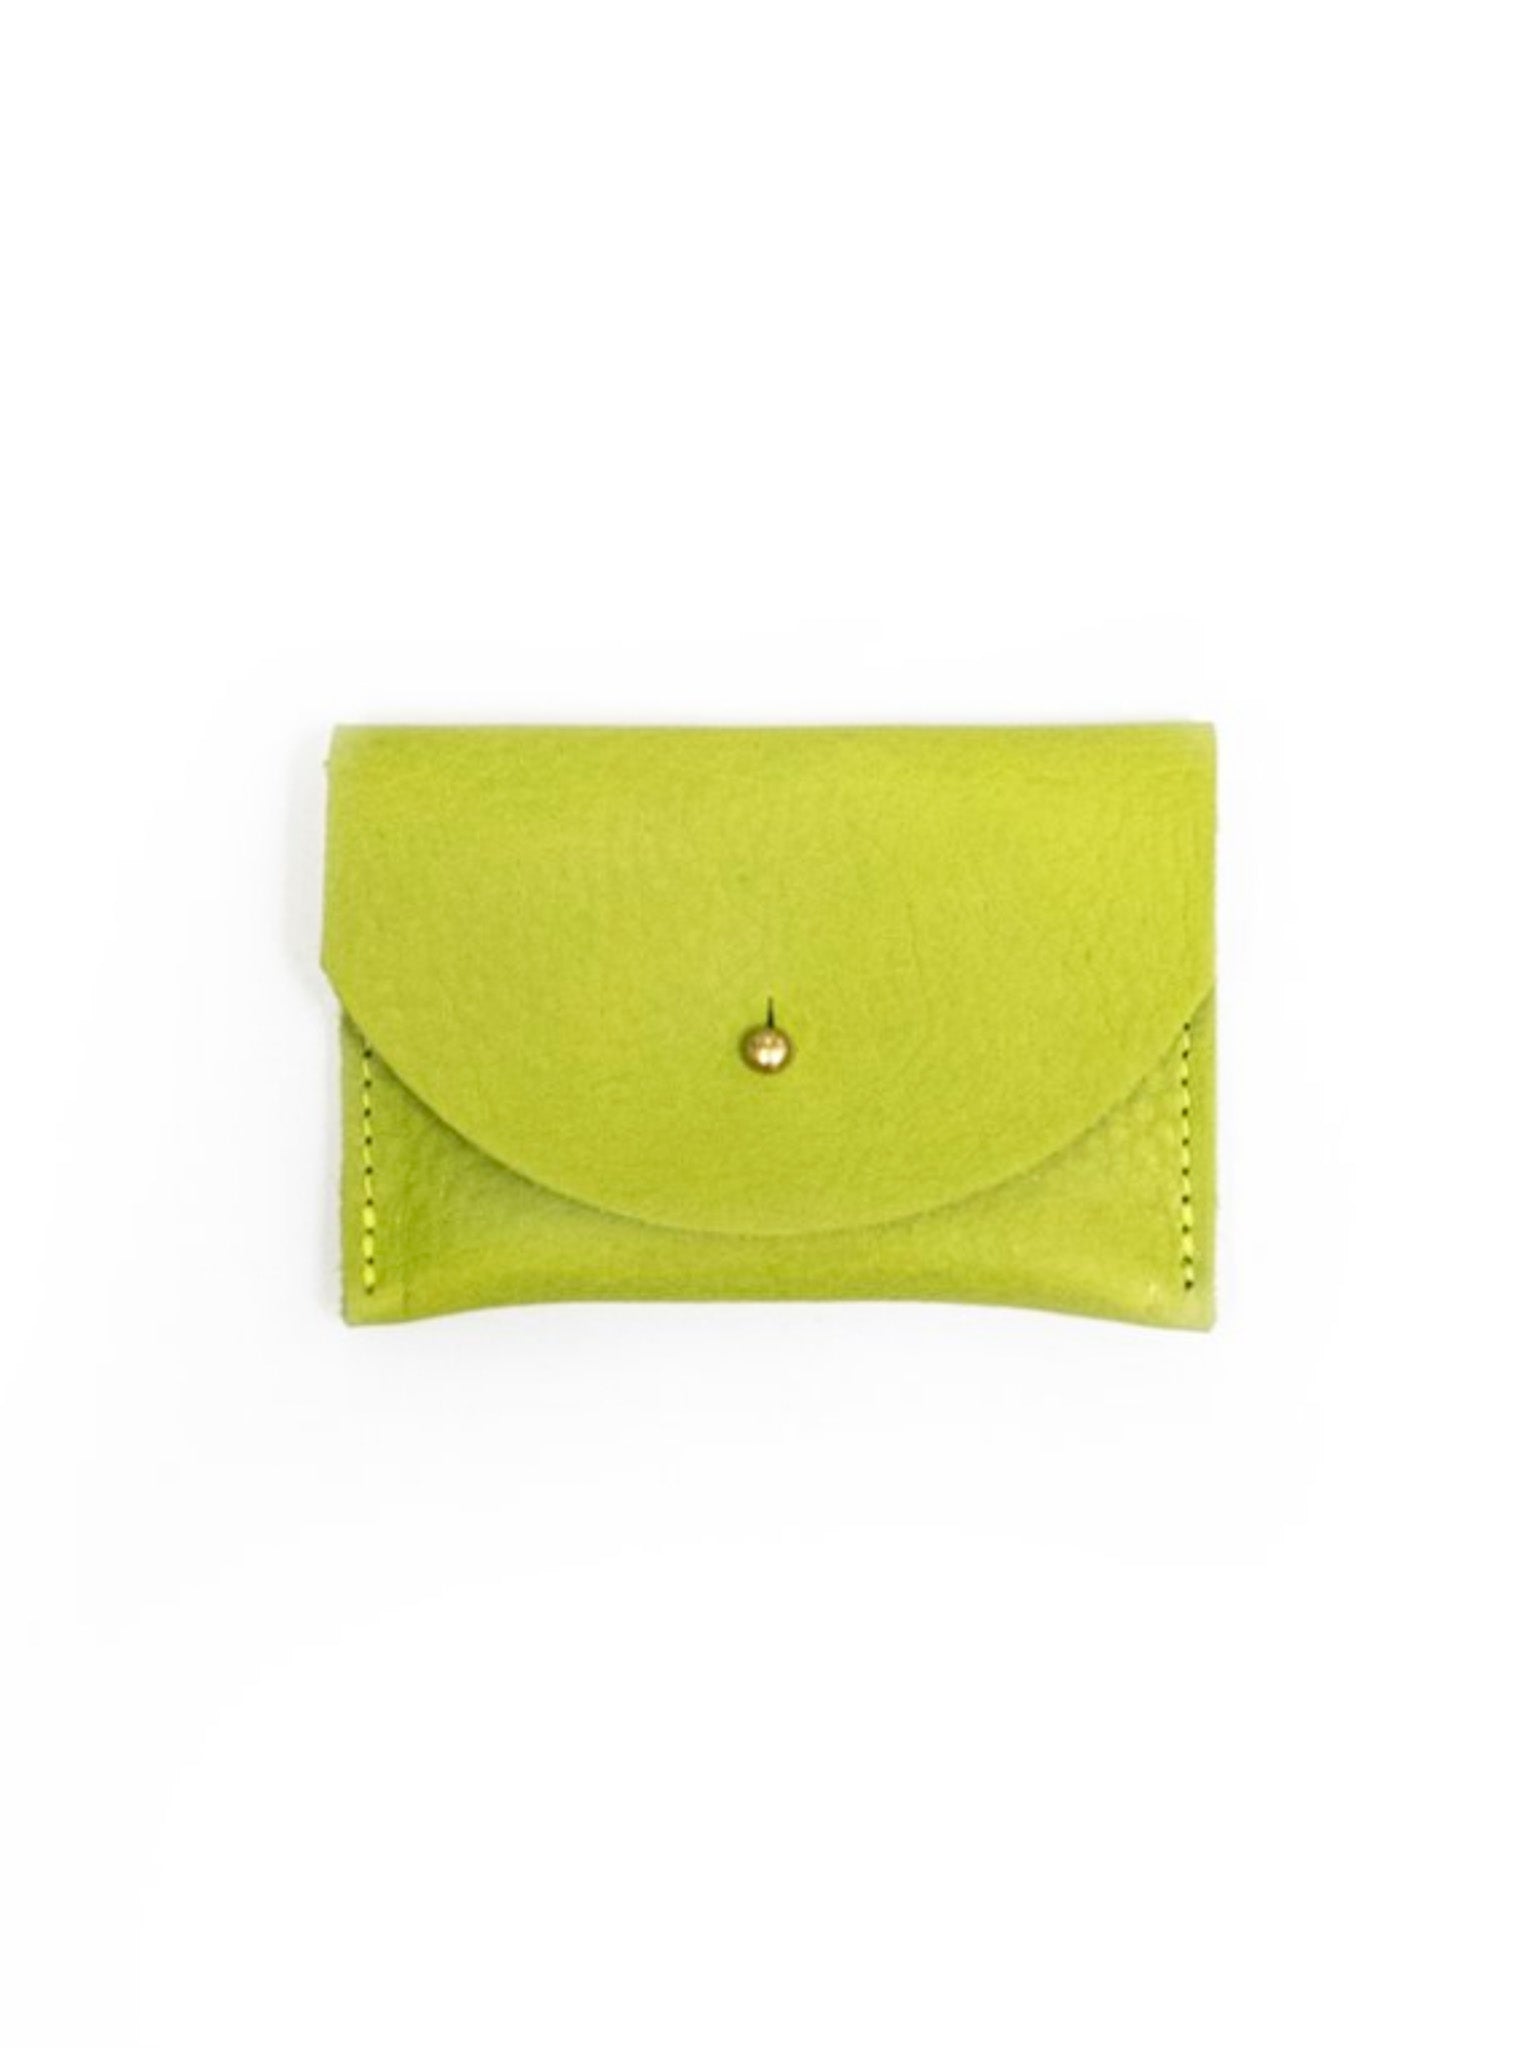 PRIMECUT: CHARTREUSE LEATHER KEYCHAIN